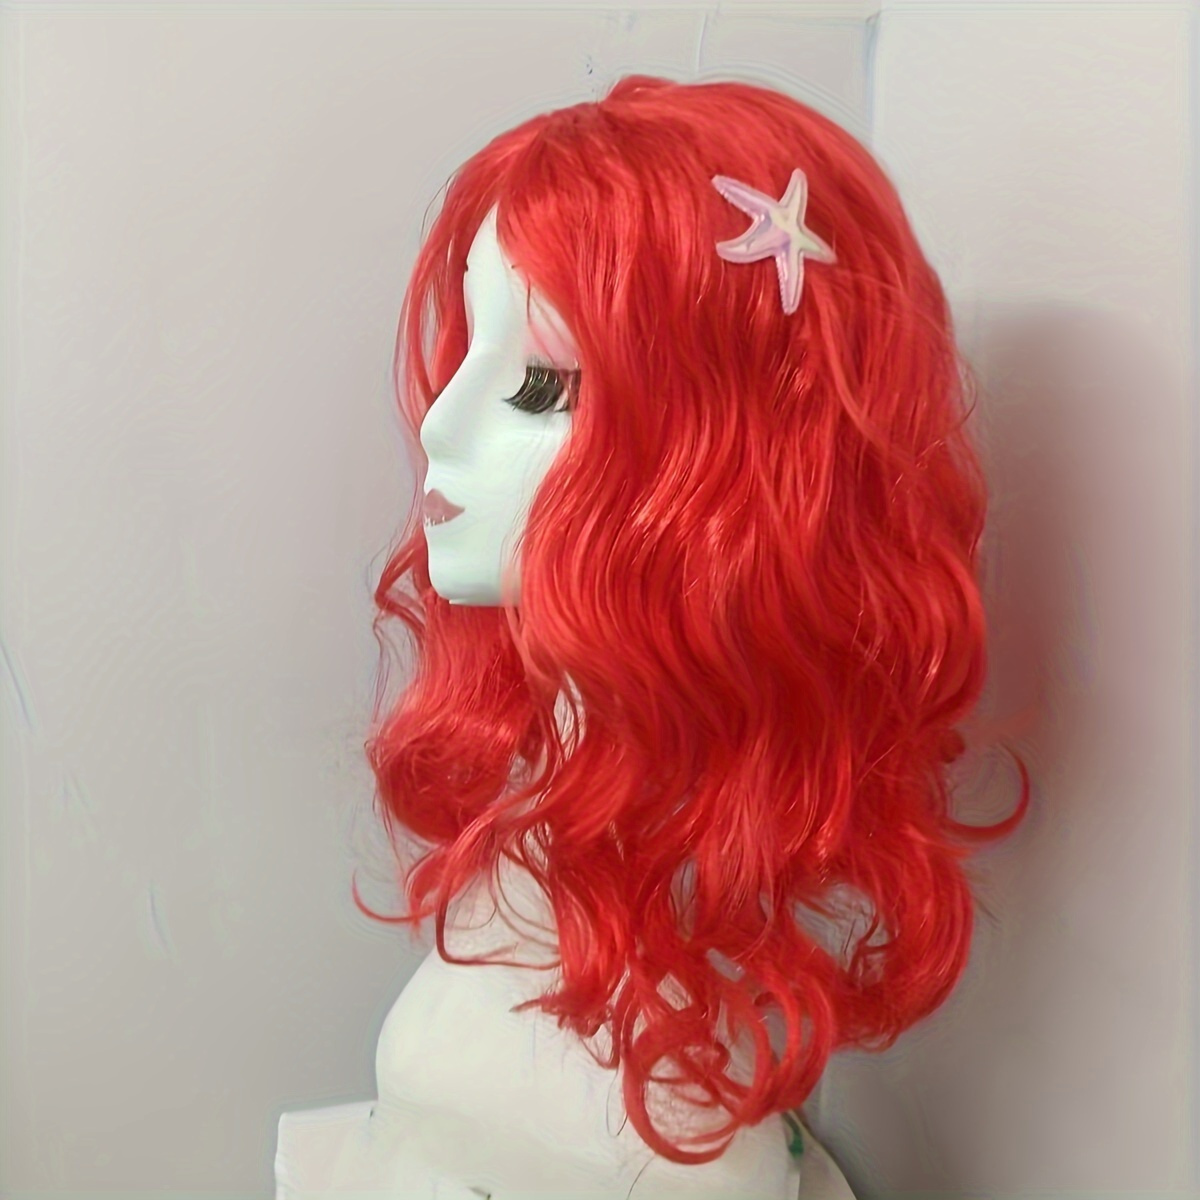 

1pc Girl's Dress Up Wig, Long Decorative Wig, Cosplay Party Cute Red Hair